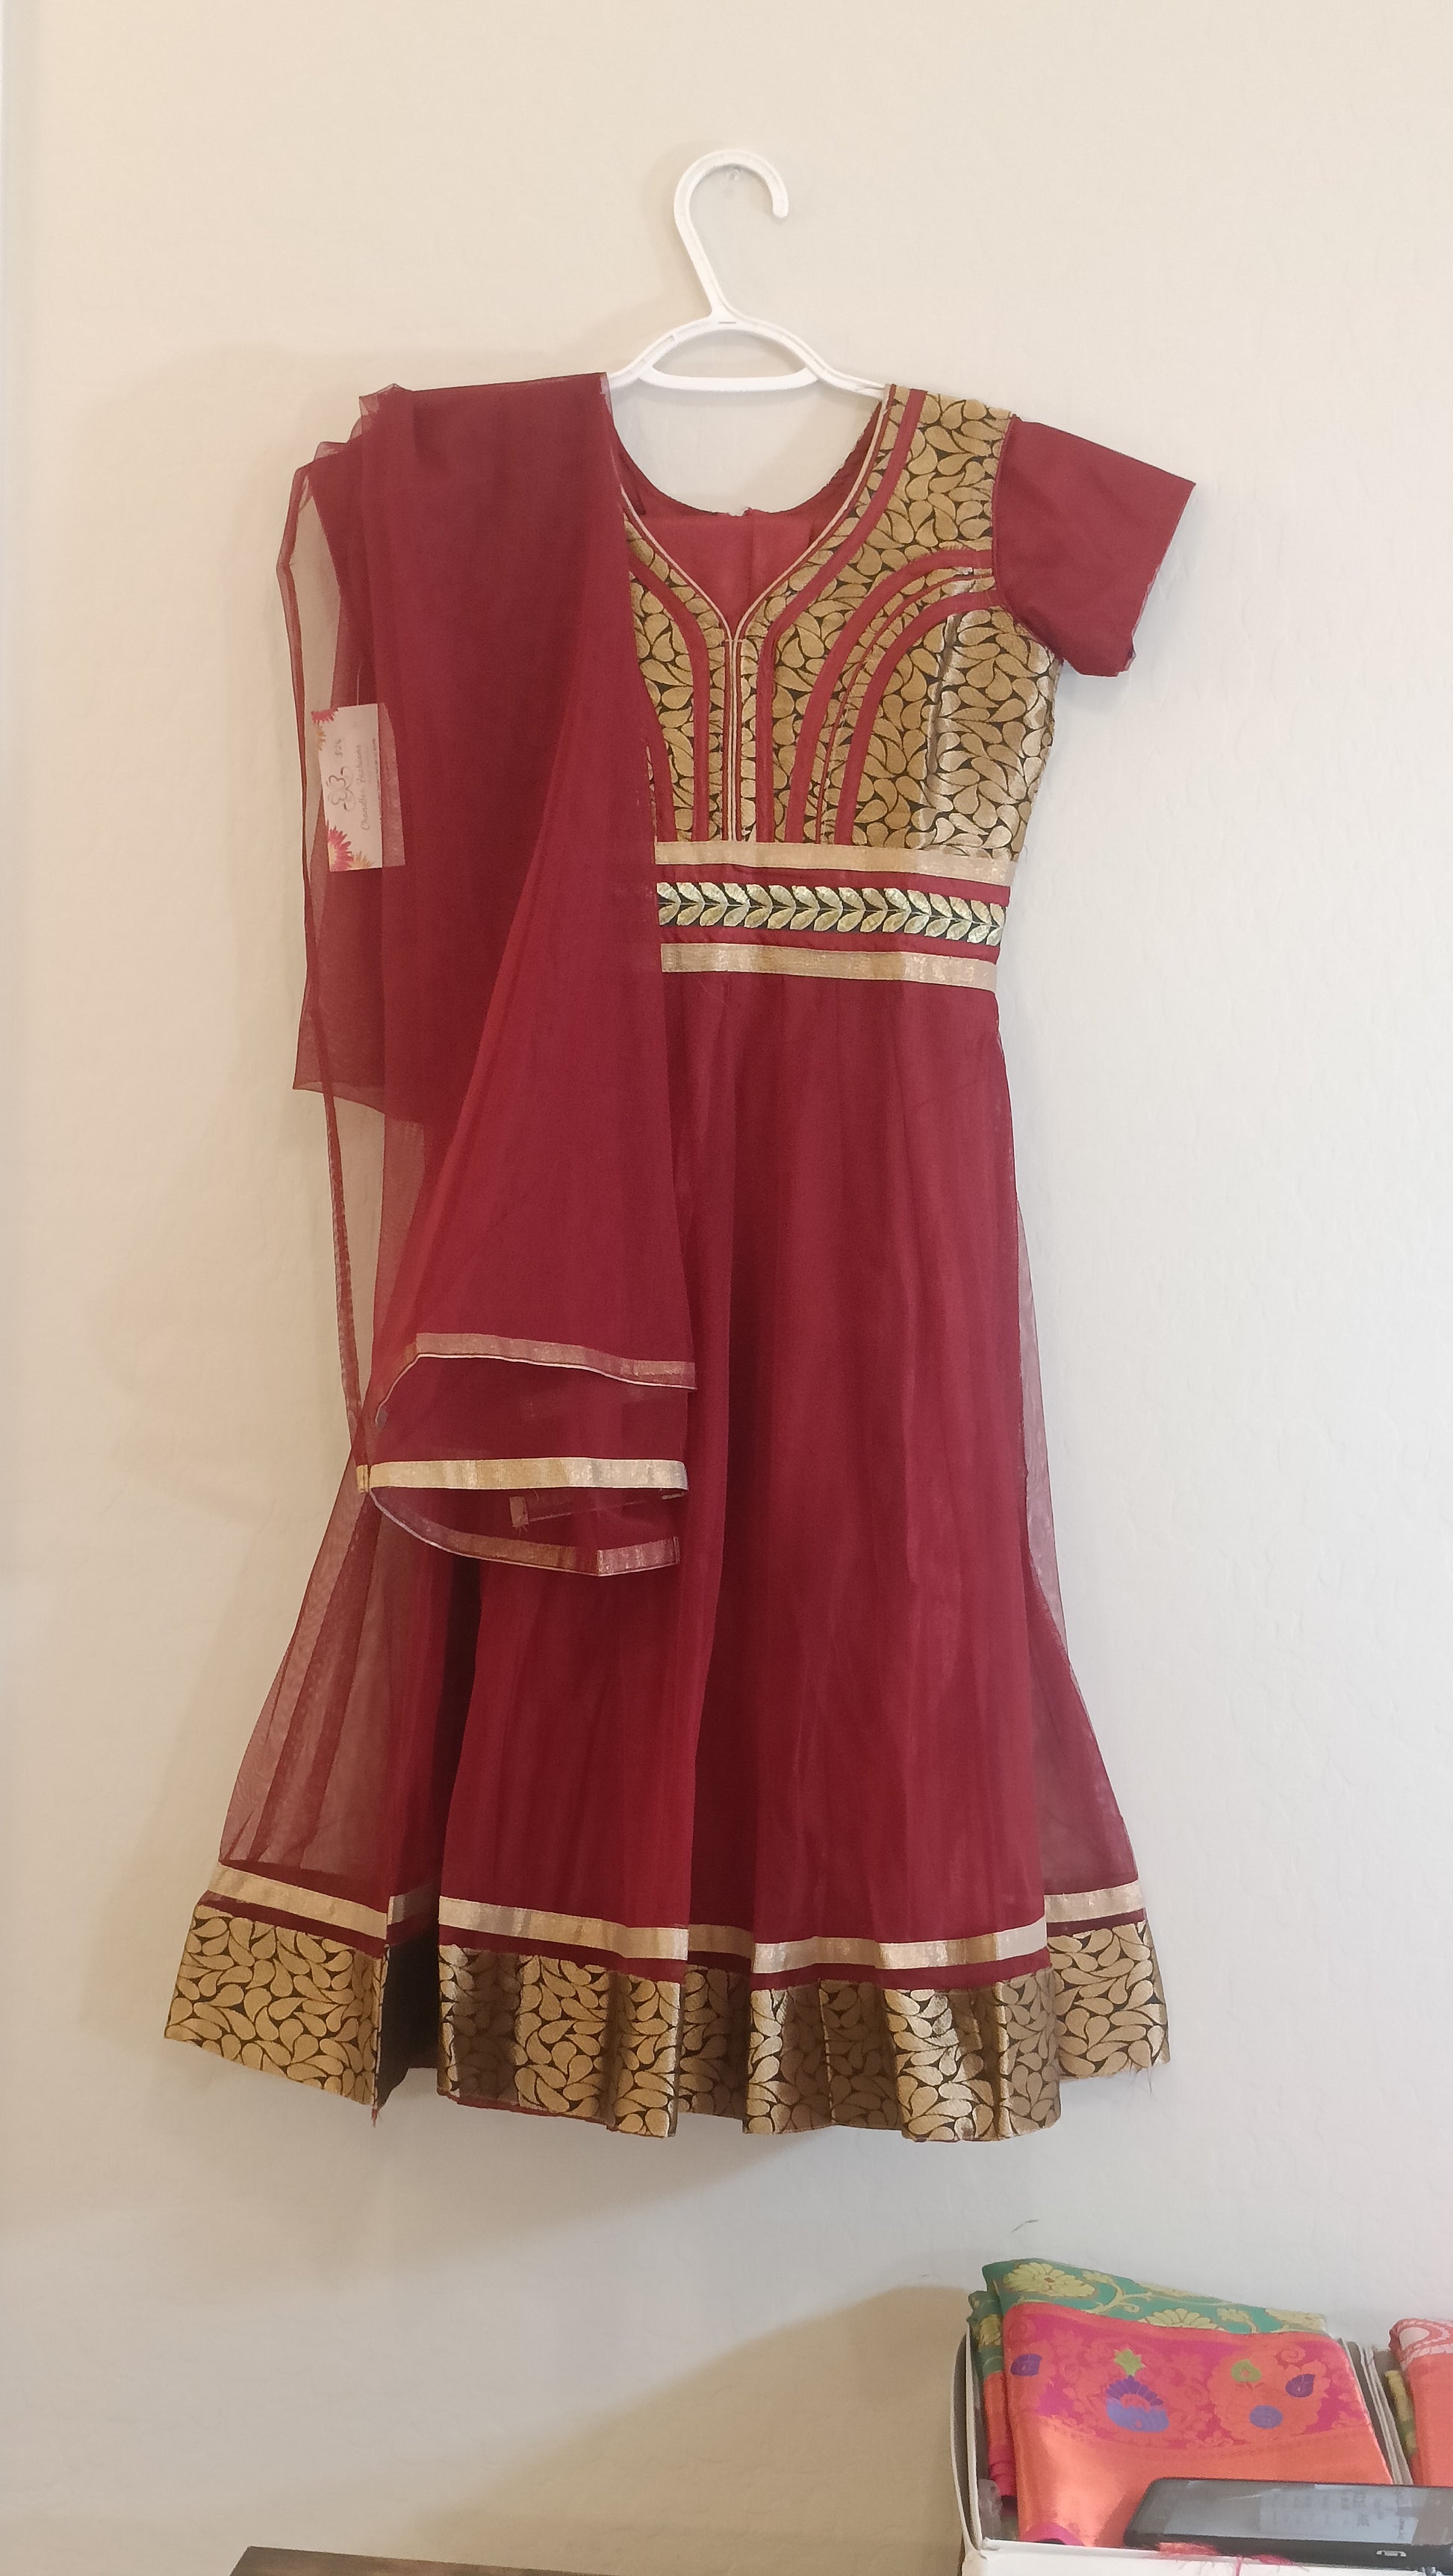 Pleasing Maroon Color Kurti With Embroidery Work For Girls